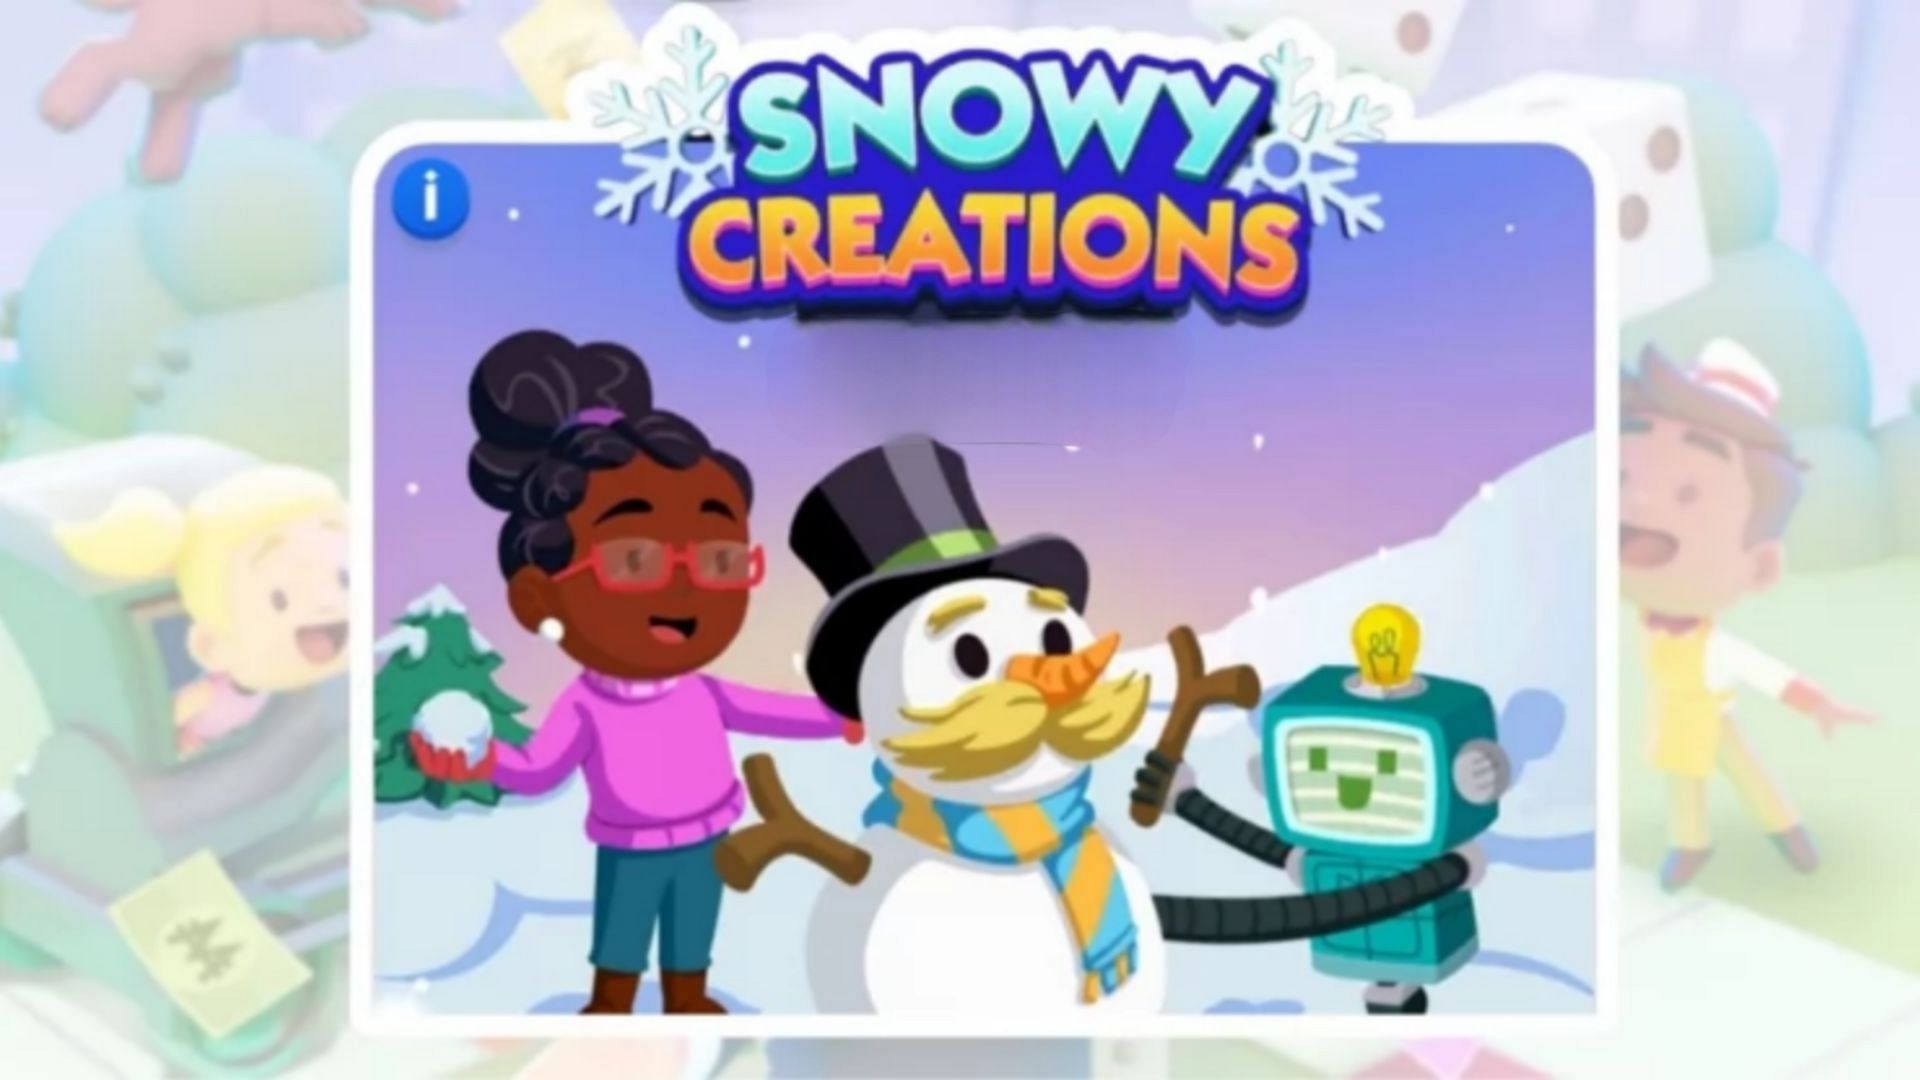 Snowy Creations tournament is back in Monopoly Go (Image via Scopely) 